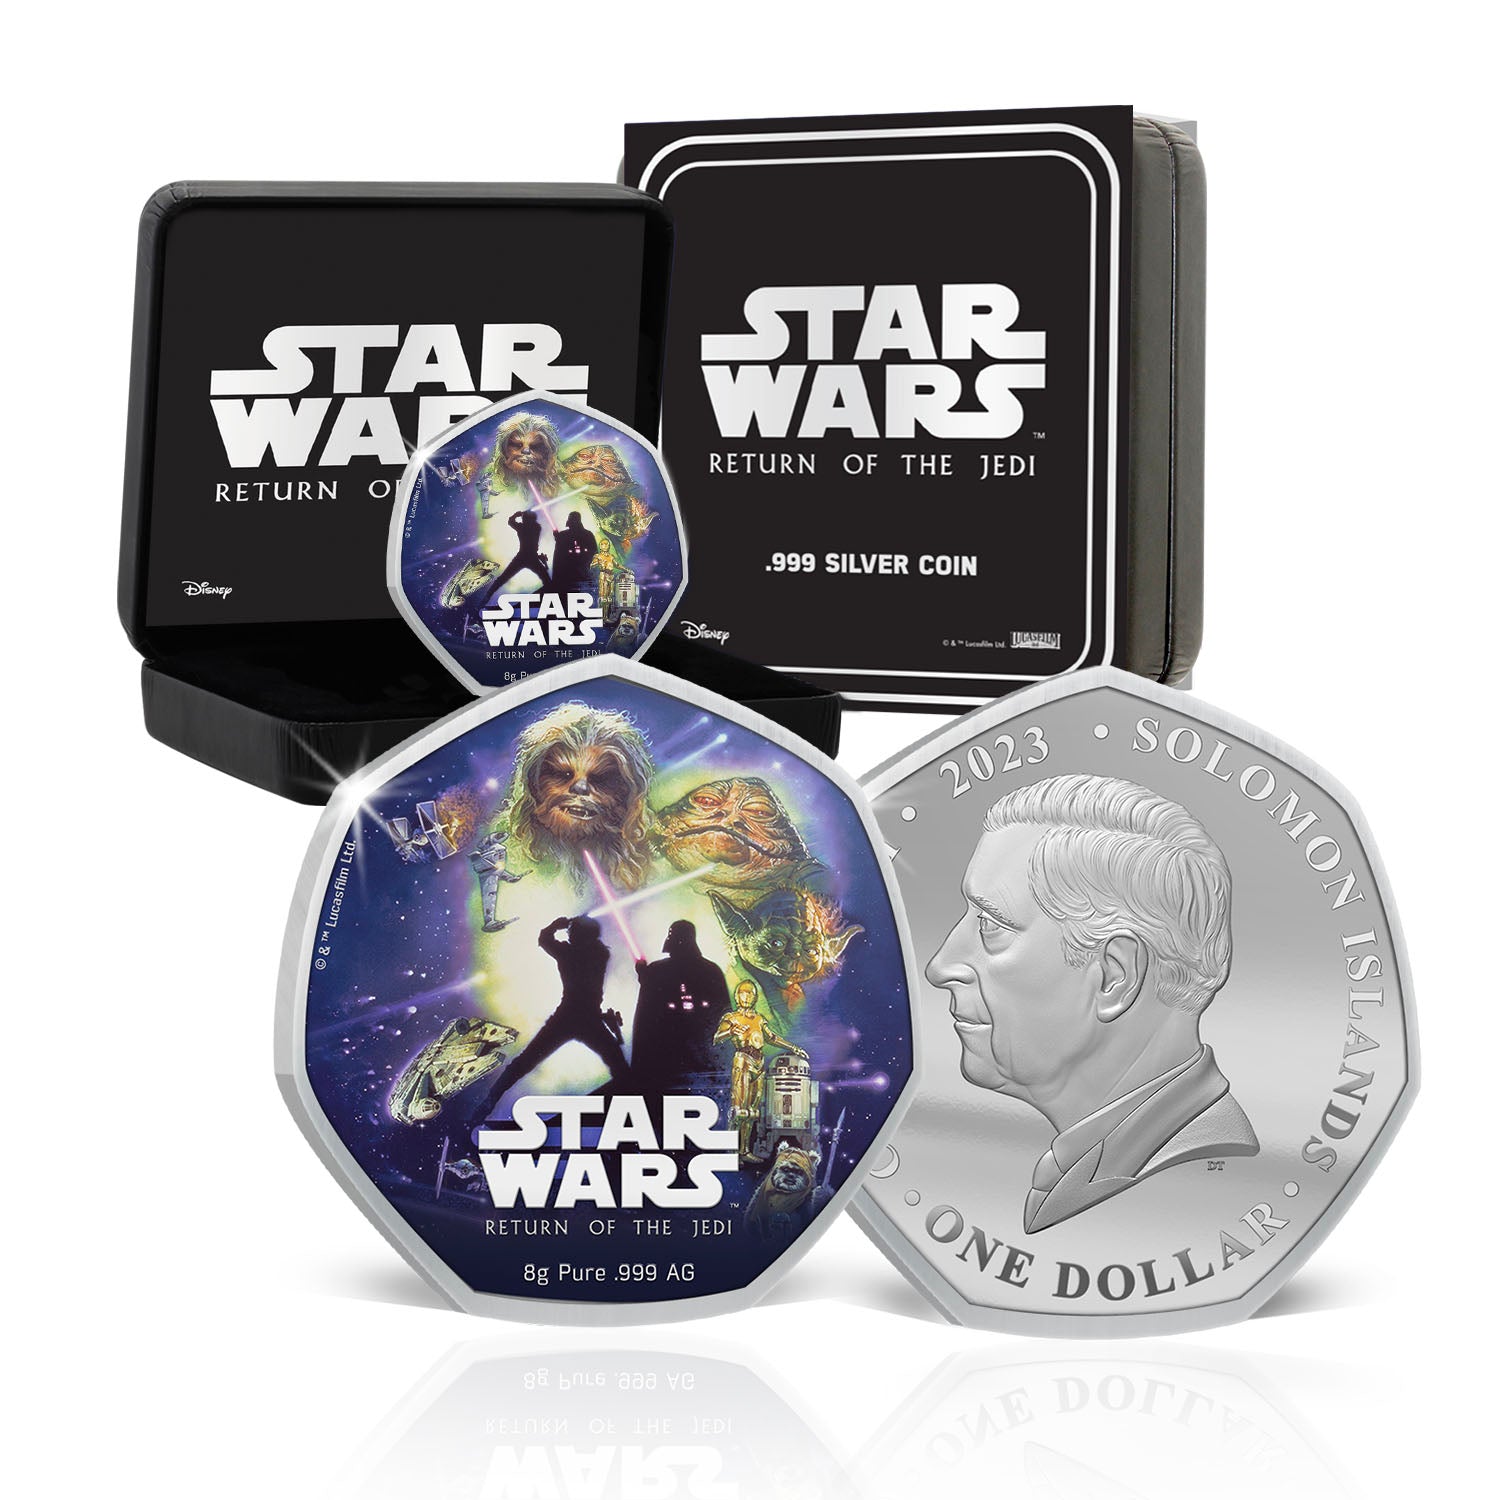 The Star Wars 40th Anniversary Return of the Jedi Solid Silver Coin